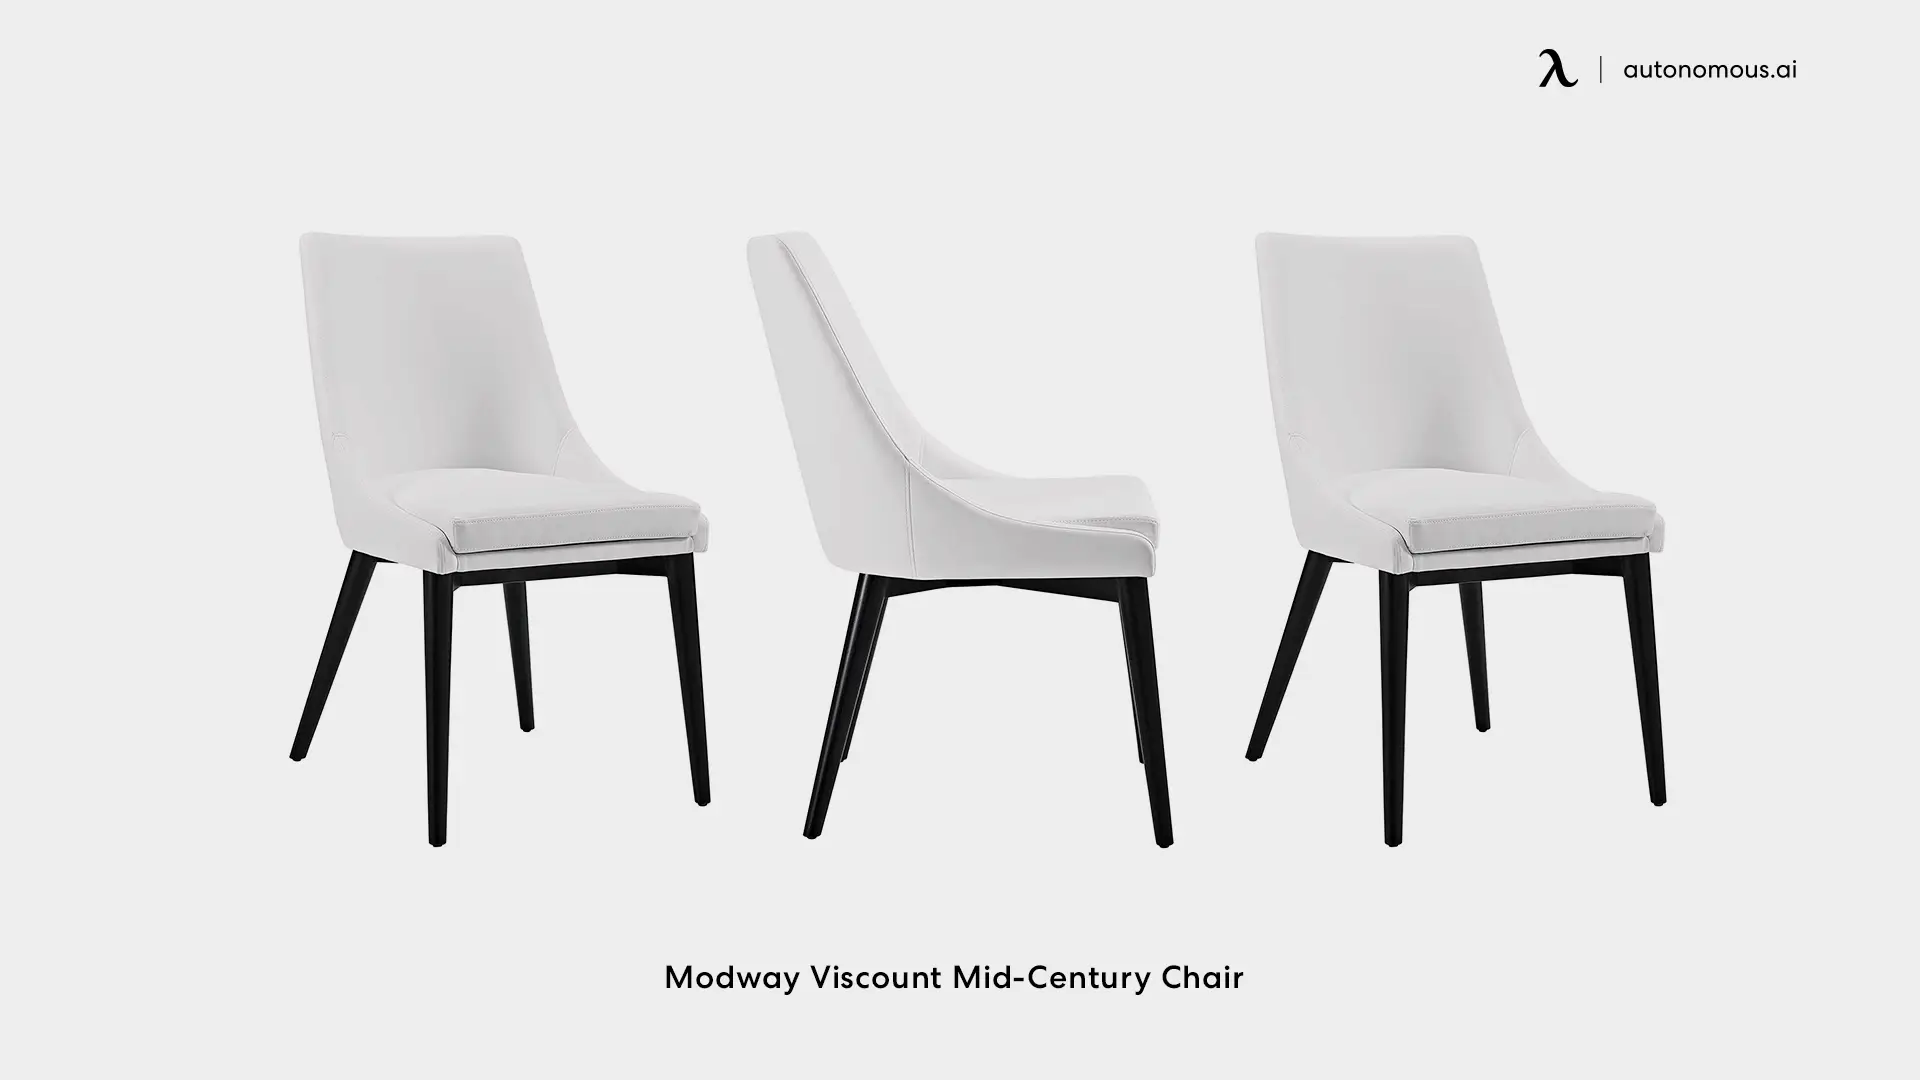 Modway Viscount Mid-Century Chair